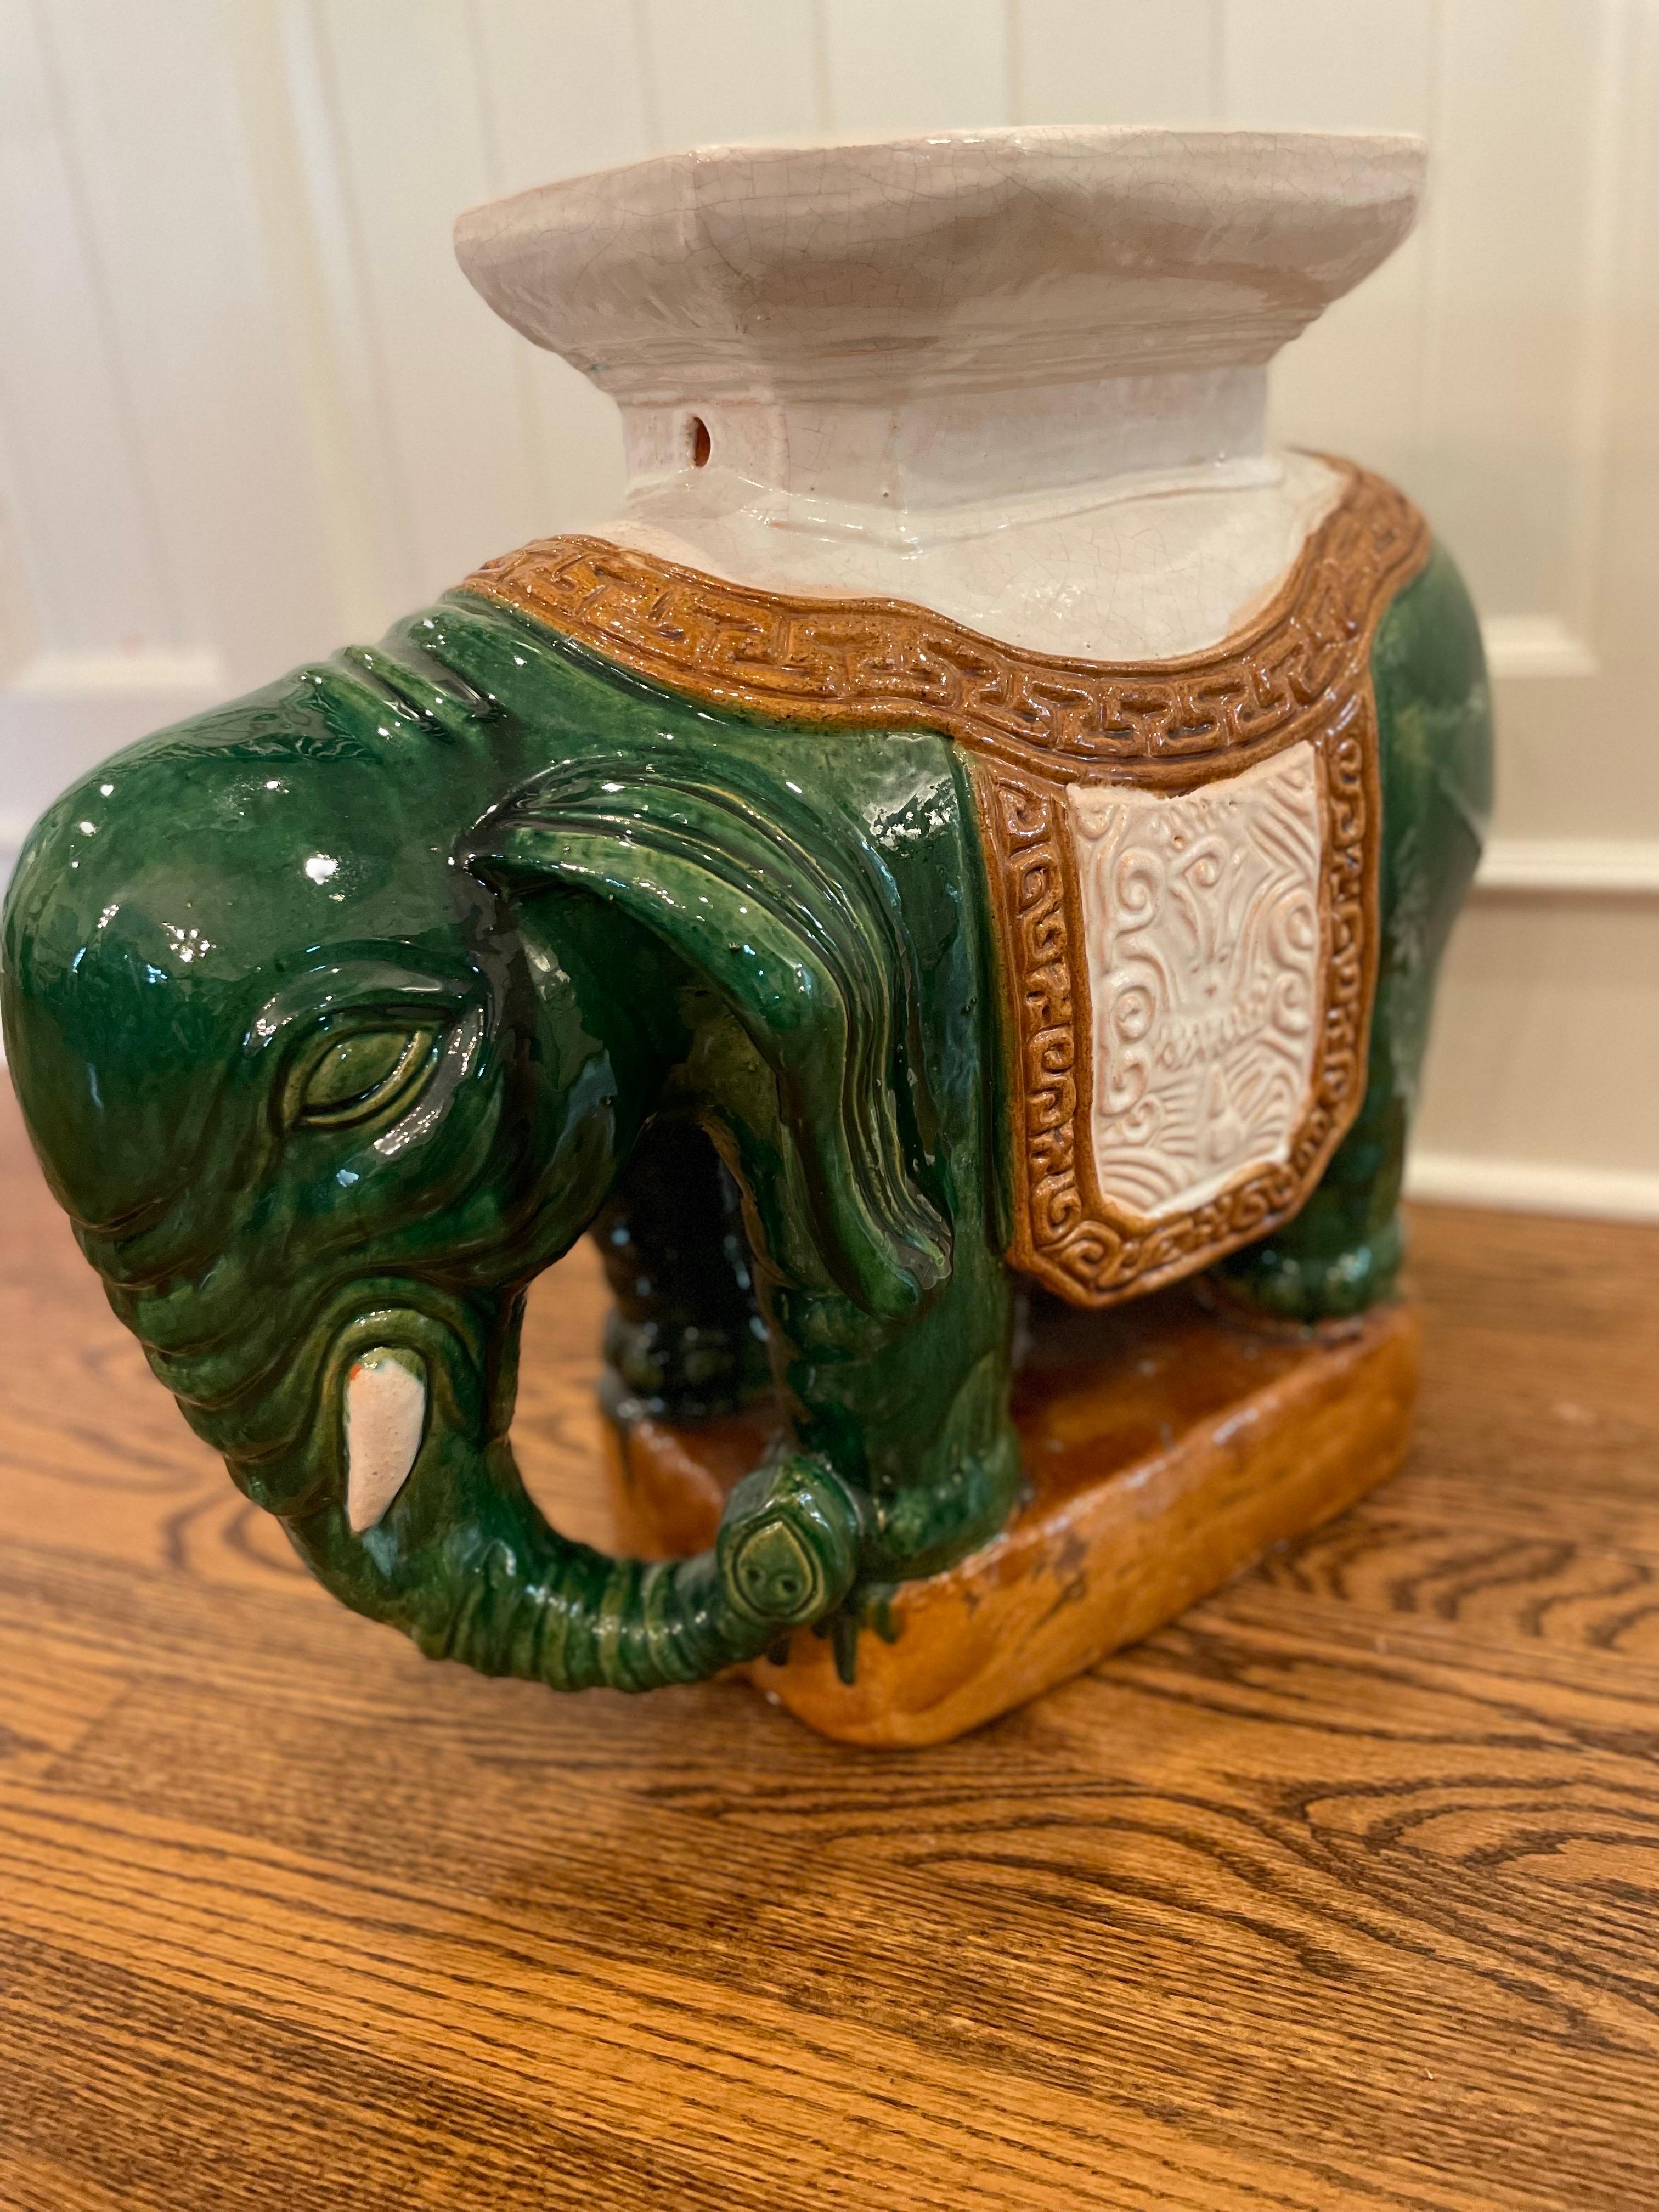 An exceptional and very charming large garden stool, mid-20th century. Chinese glazed ceramic elephant form garden seat. Stamped with Makers Mark on inside- from Hong Kong. 

Sourced from the estate of a Kentucky Doctor with an exquisite perfectly